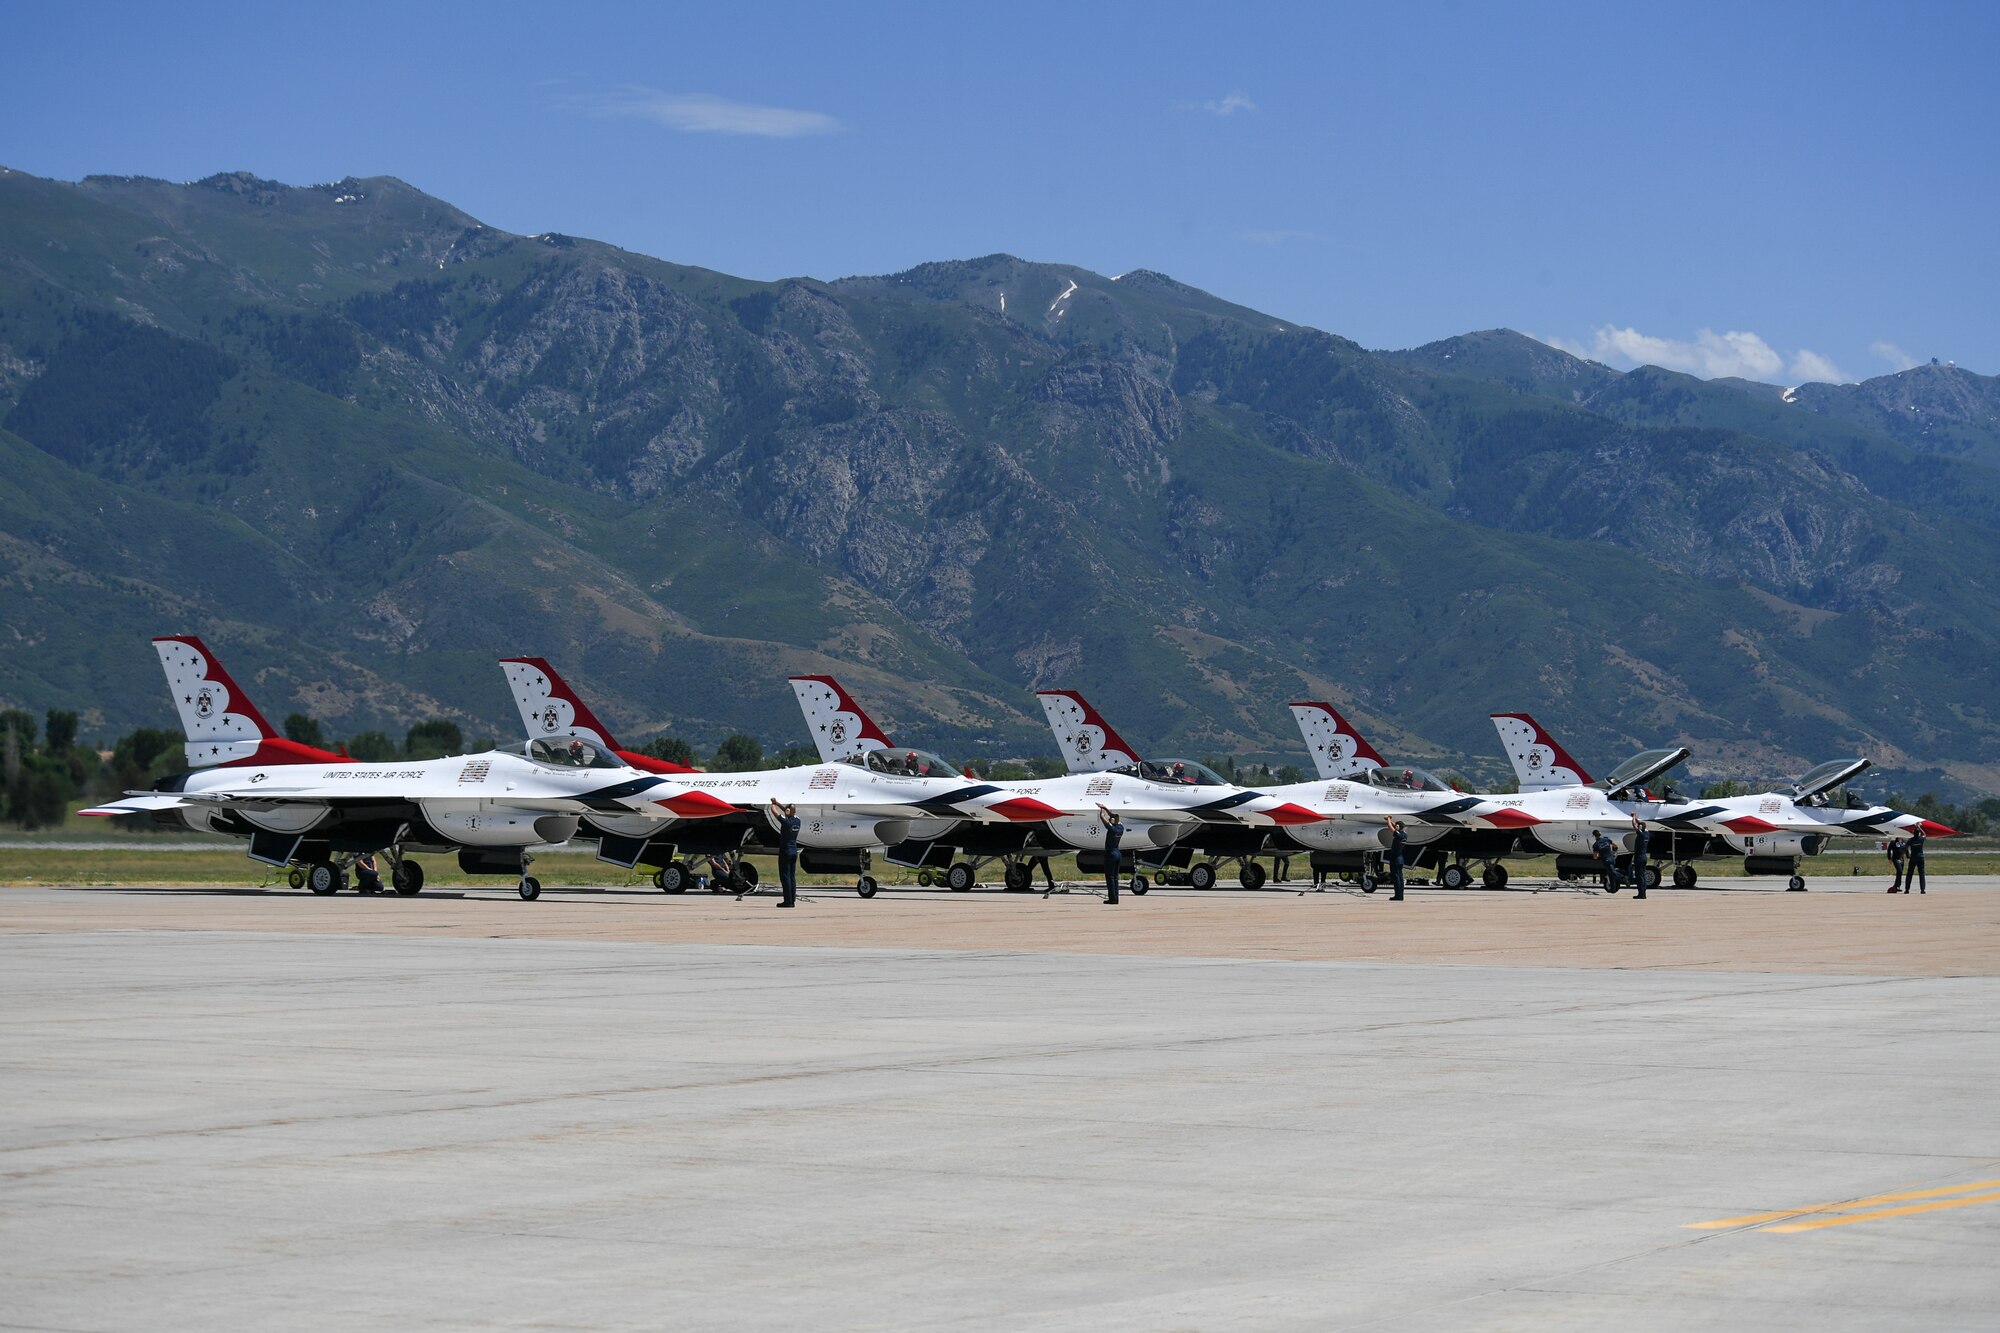 The U.S. Air Force Thunderbirds arrived June 24, 2022, at Hill Air Force Base for the Warriors Over the Wasatch Air and Space show happening June 25-26.